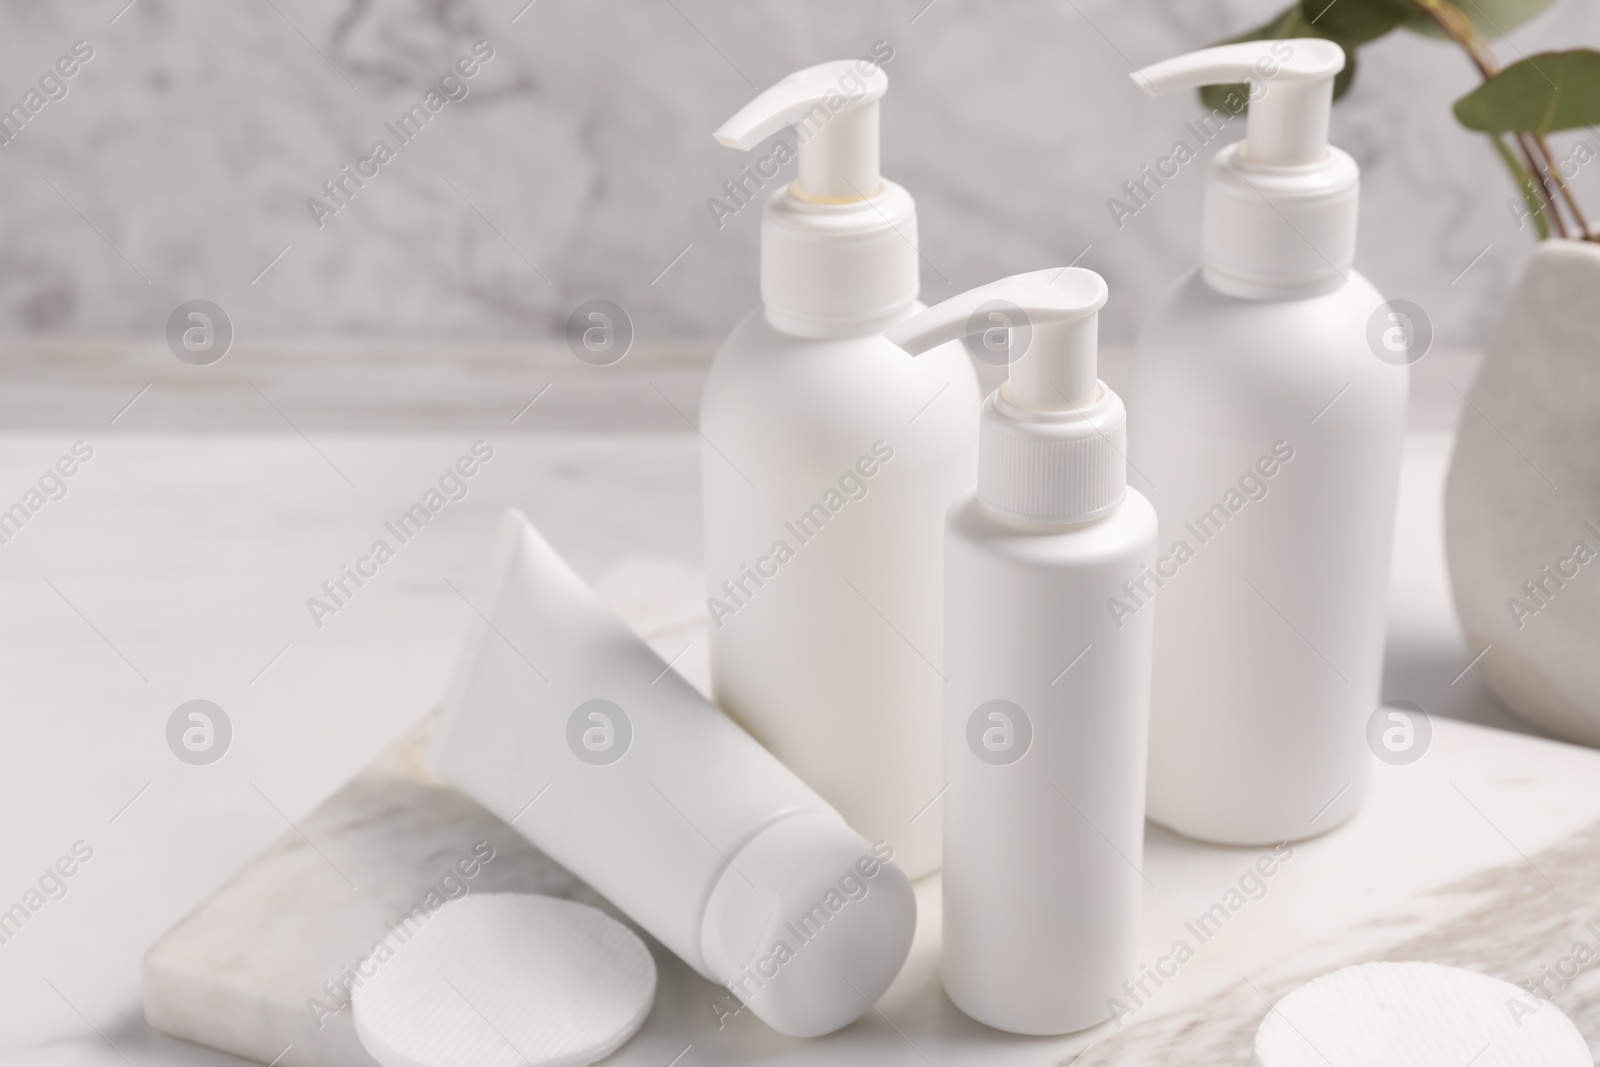 Photo of Different face cleansing products and cotton pads on white table